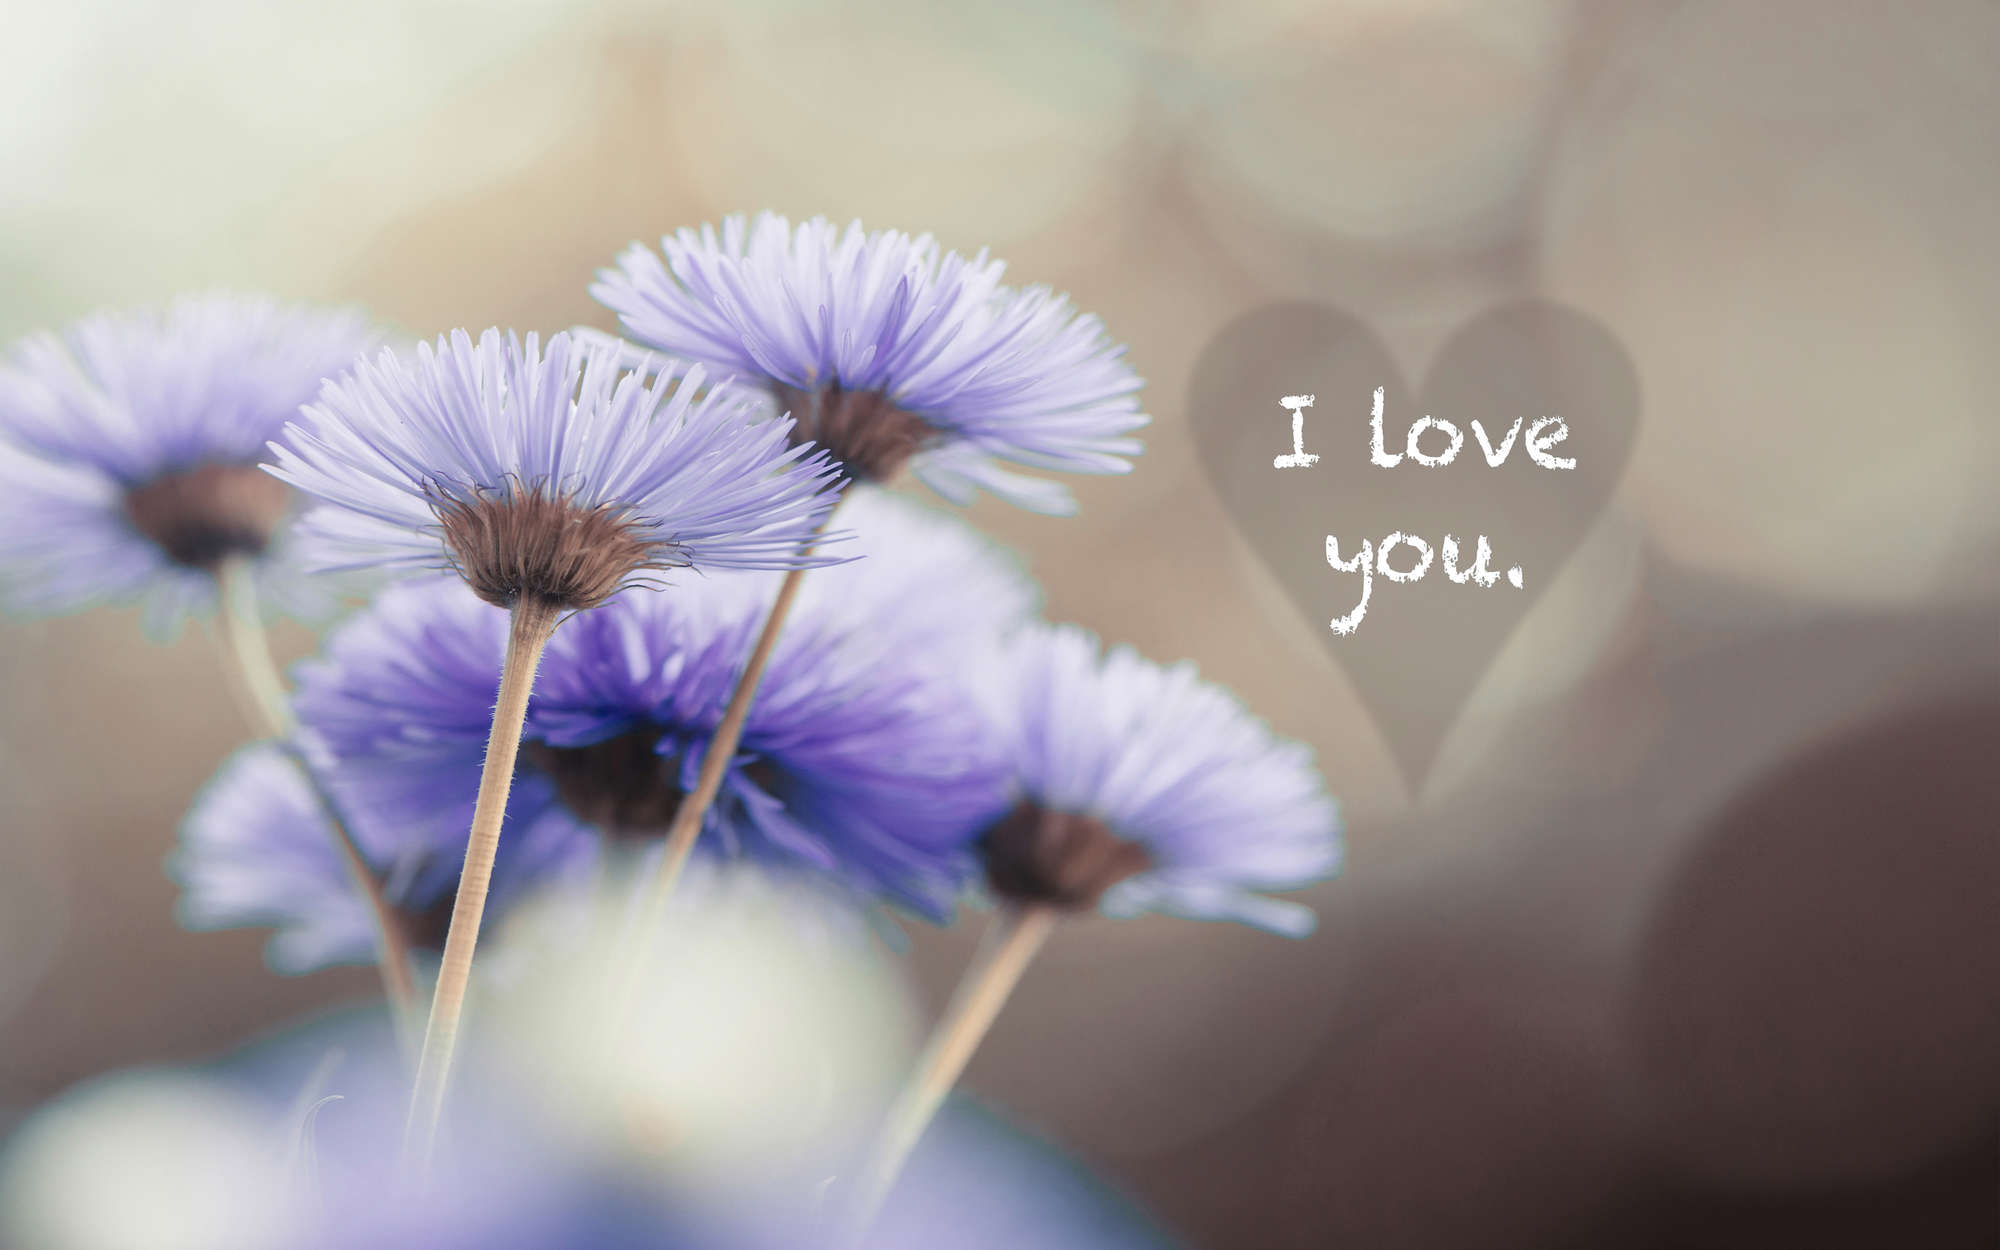             Photo wallpaper flowers in violet with lettering "I love you" - Premium smooth fleece
        